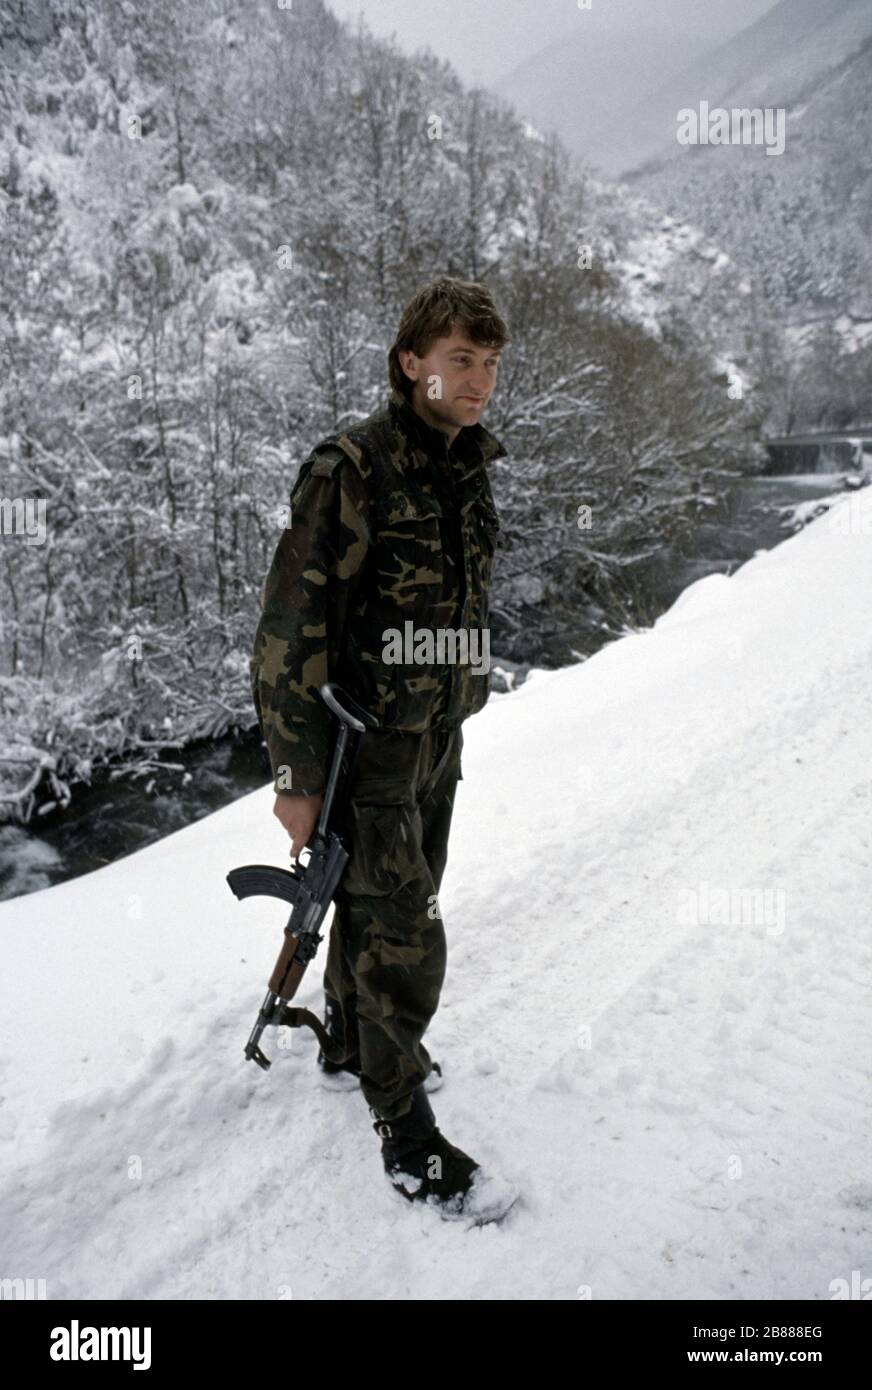 21st January 1994 During the war in central Bosnia: a Bosnian Muslim policeman with his Zastava M70 assault rifle just north of Gornji Vakuf. Stock Photo